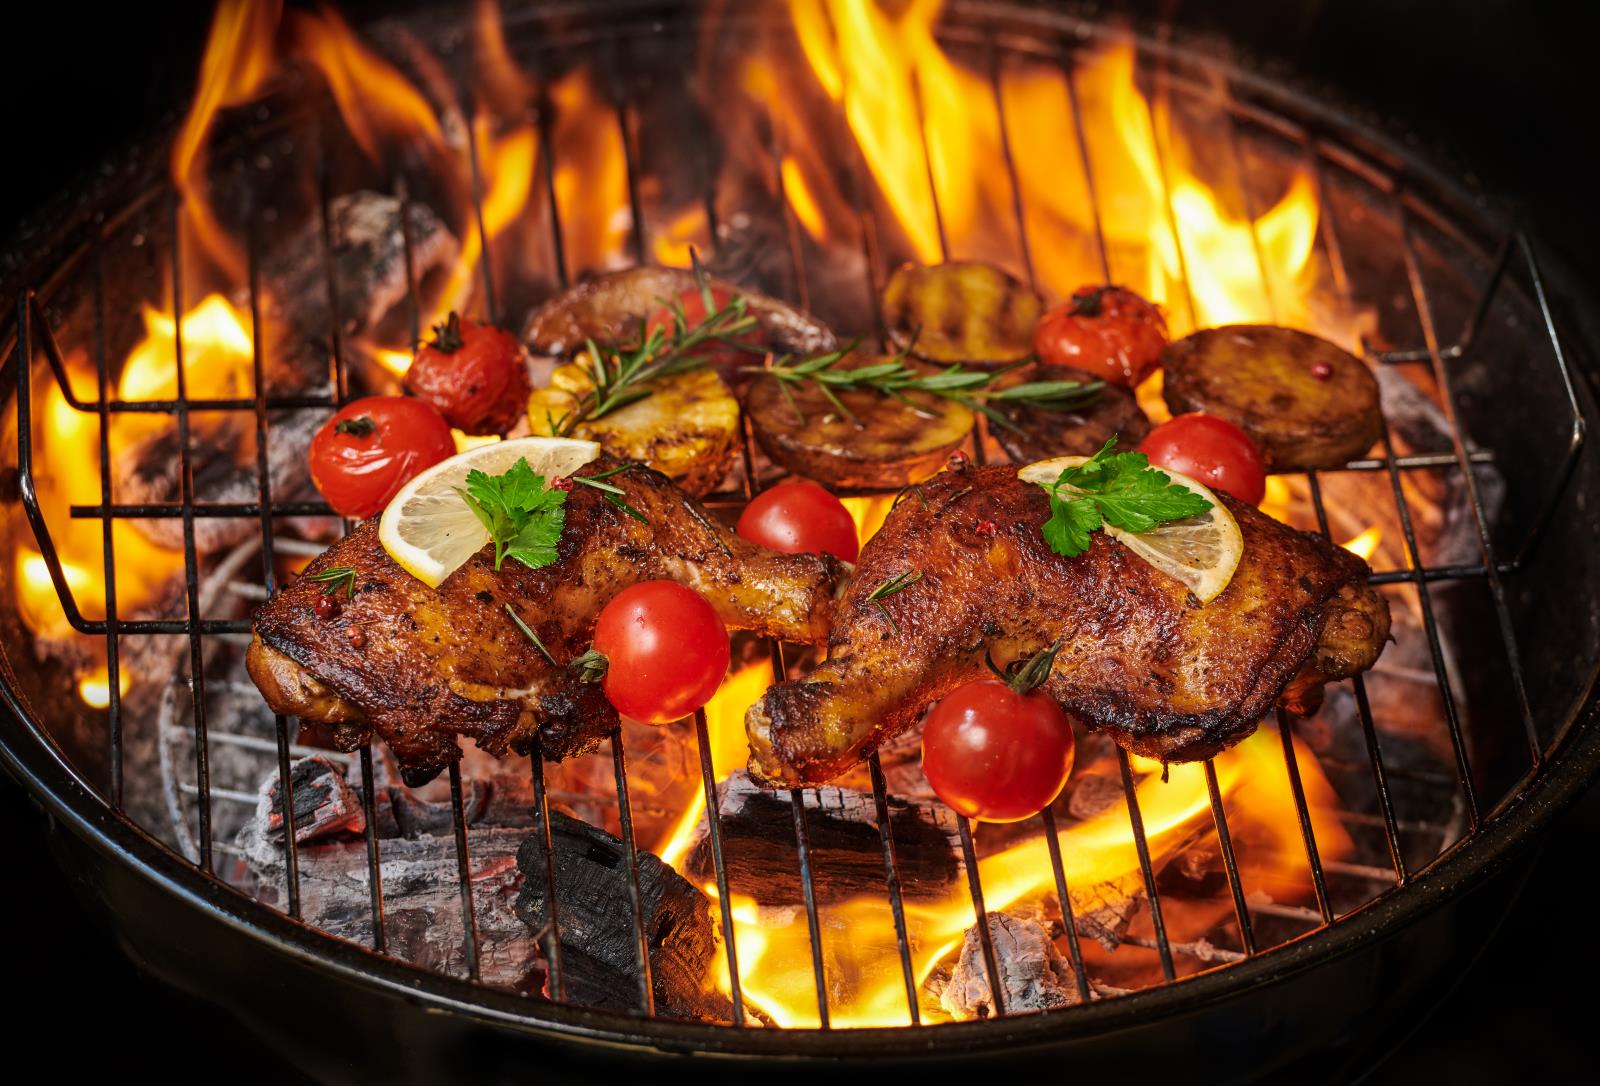 grilled-chicken-legs-flaming-grill-with-grilled-vegetables-with-tomatoes-potatoes-pepper-seeds-salt(1).jpg